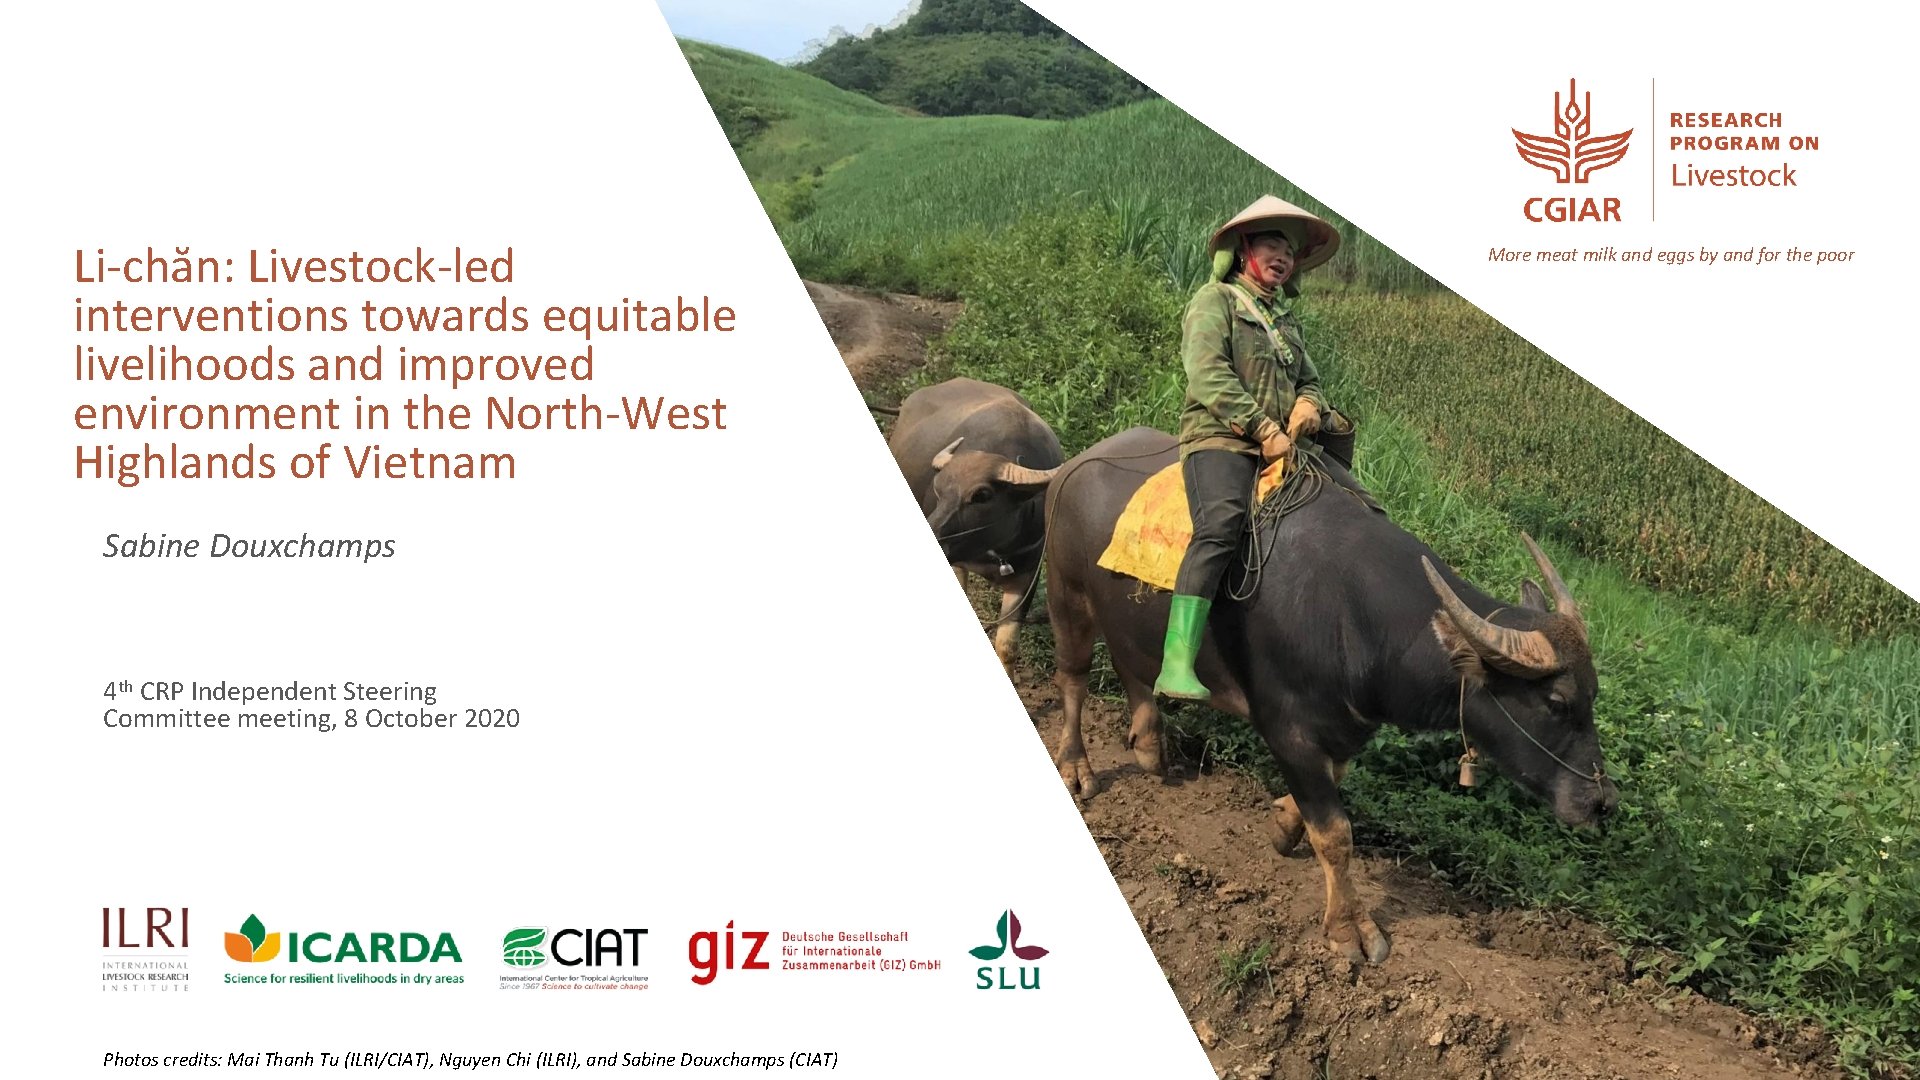 Li-chăn: Livestock-led interventions towards equitable livelihoods and improved environment in the North-West Highlands of